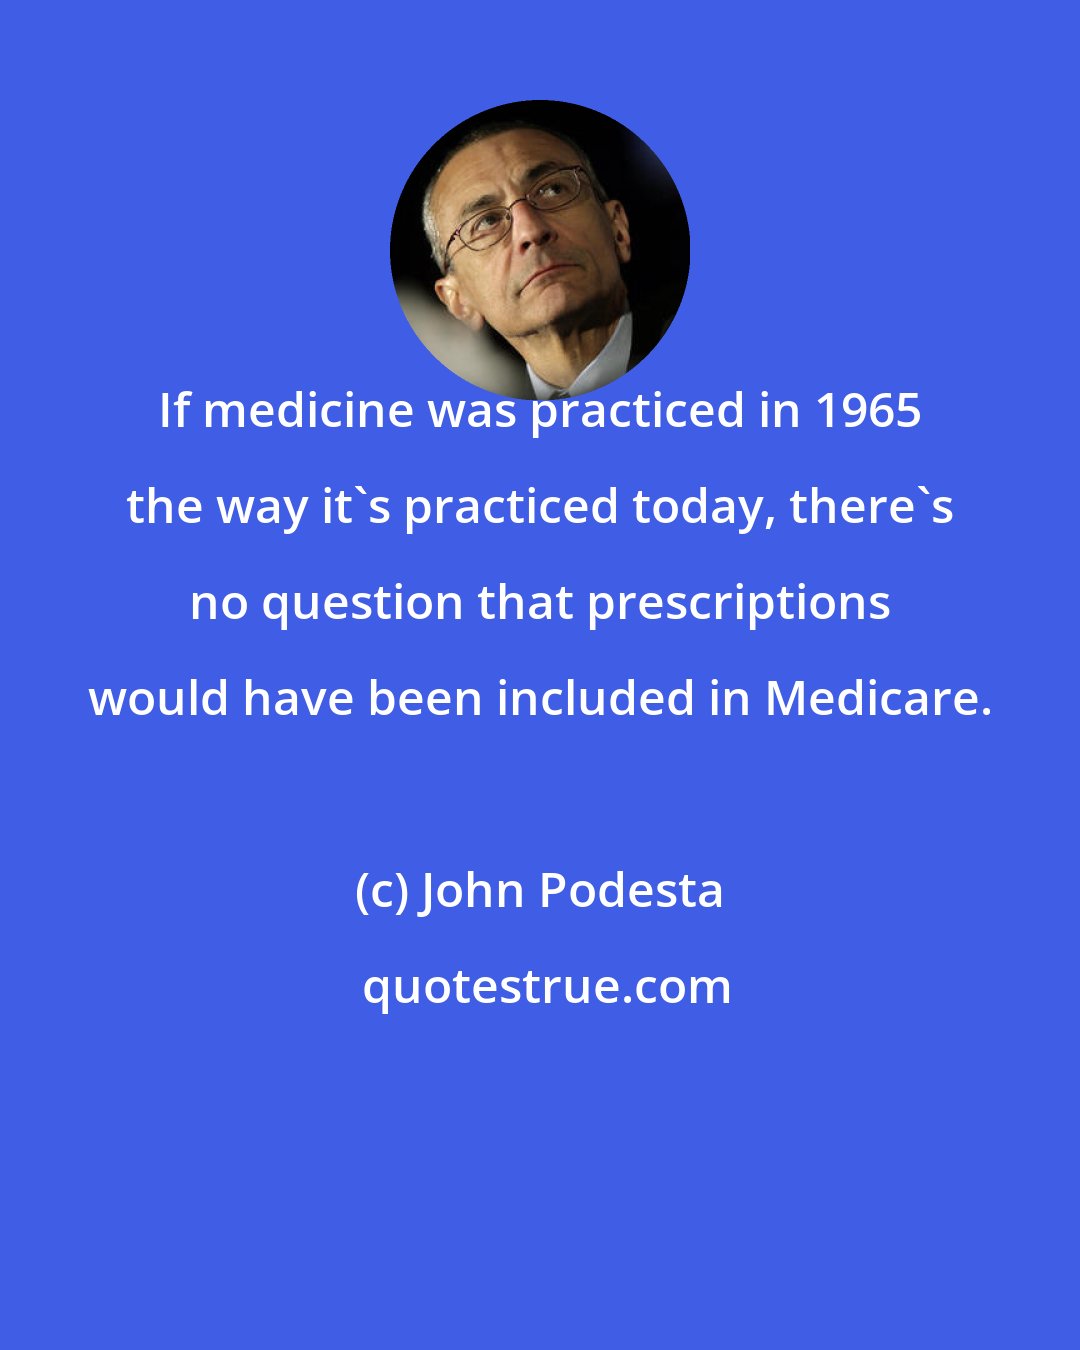 John Podesta: If medicine was practiced in 1965 the way it's practiced today, there's no question that prescriptions would have been included in Medicare.